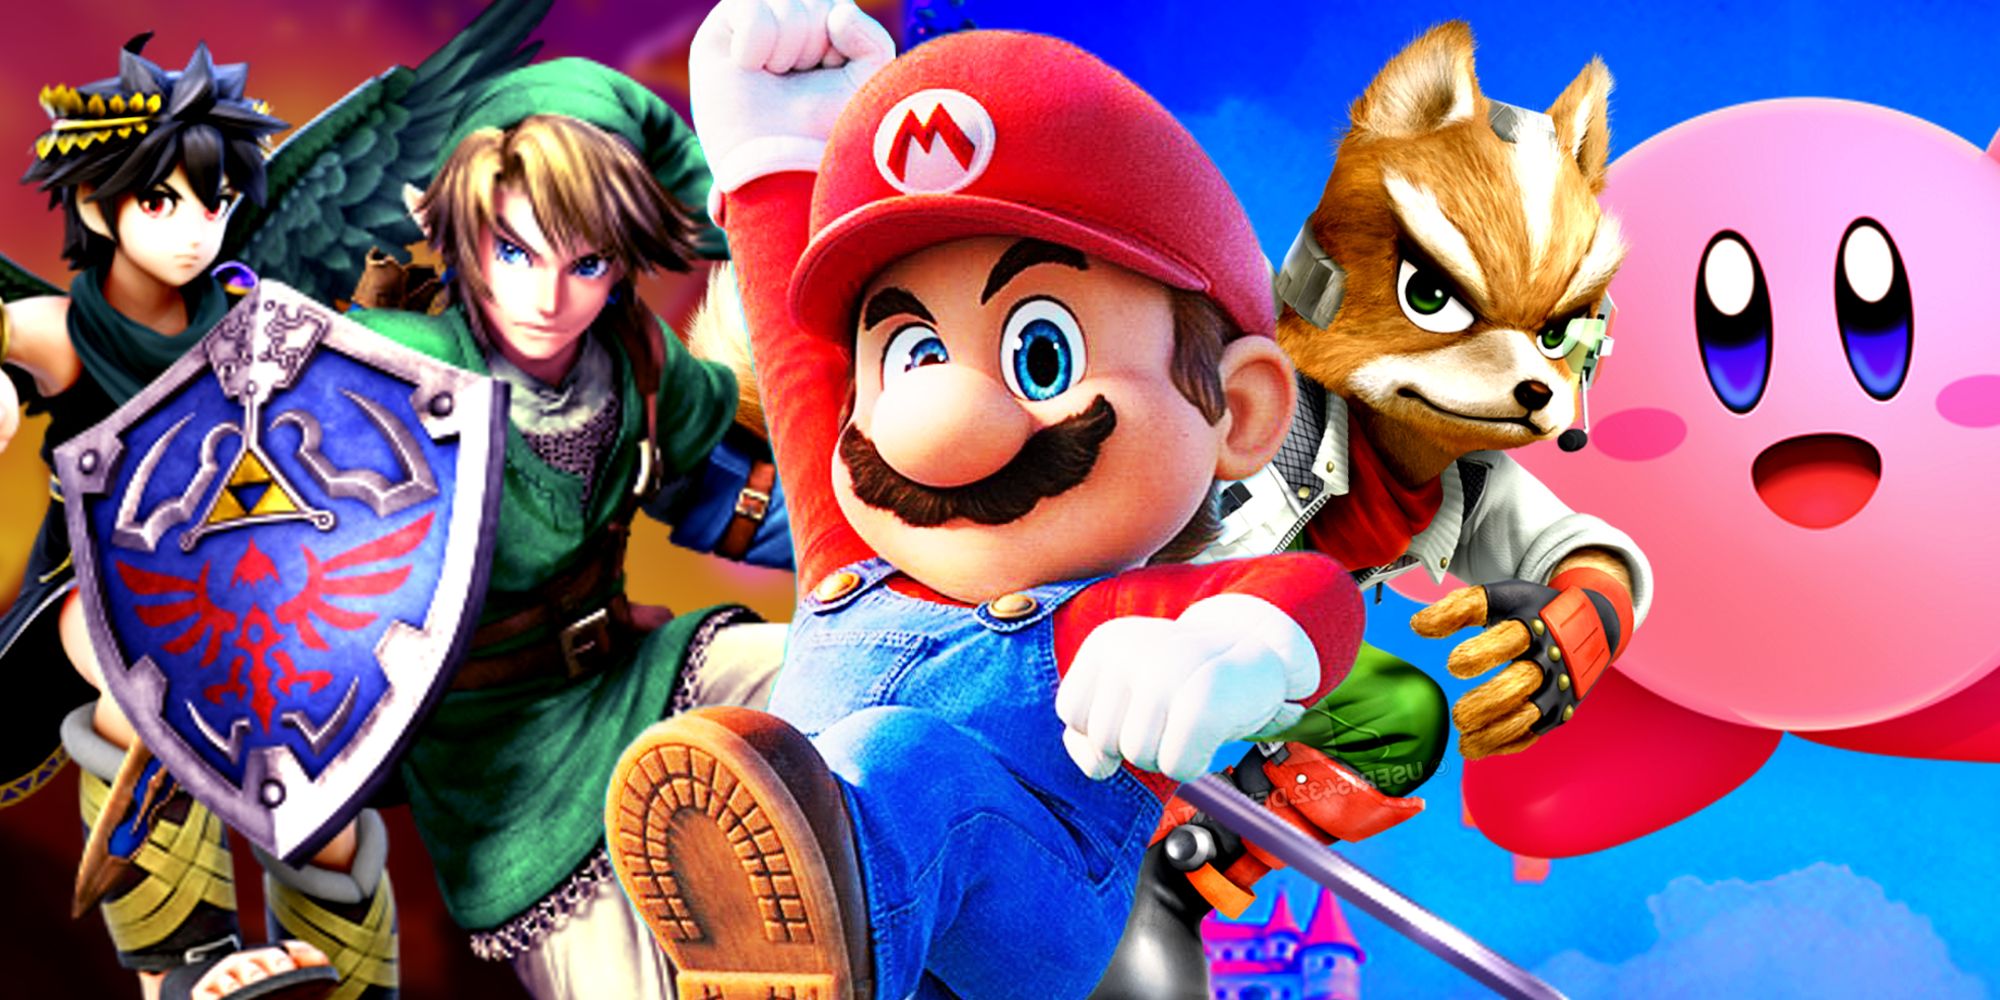 Nintendo’s Movie Franchise Plans Mean Disney & Pixar’s Animated Reign Will End